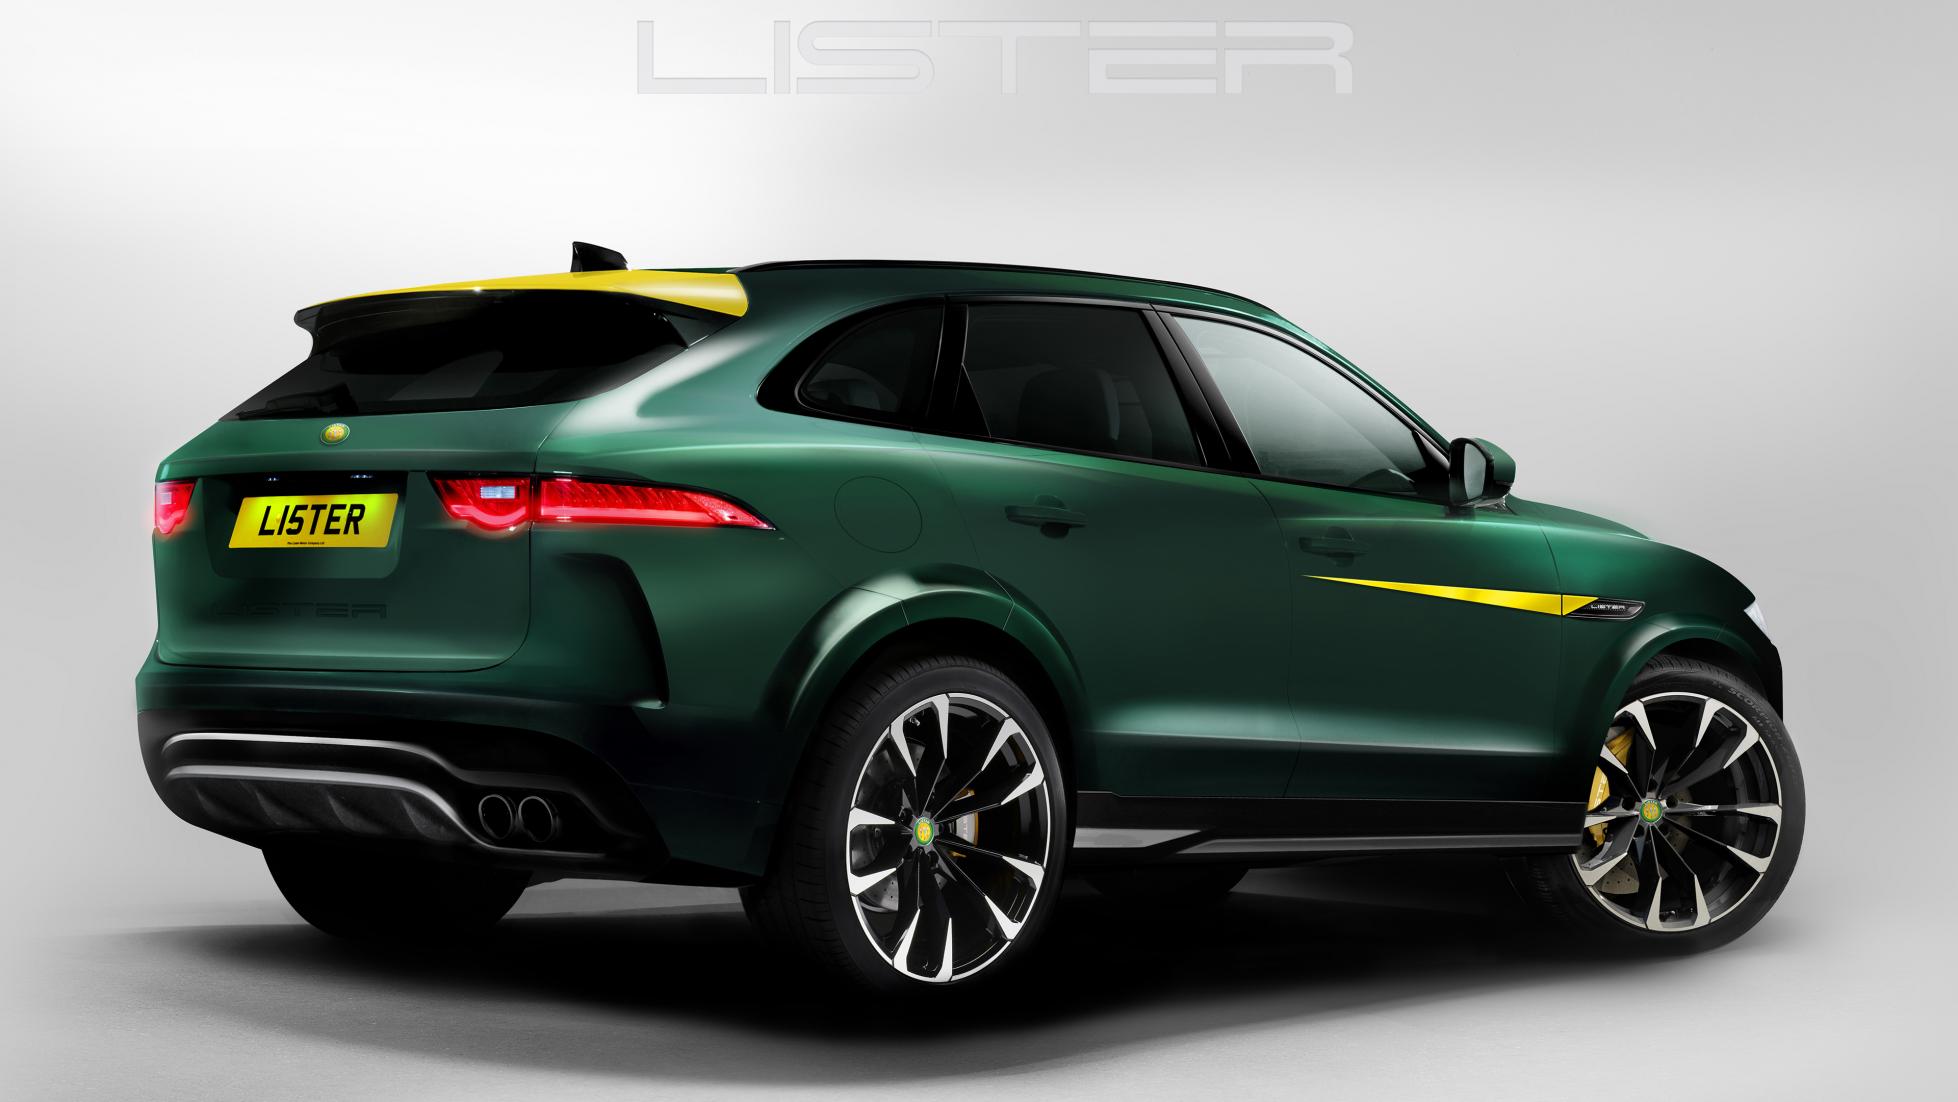 Lister Jaguar F-Pace Revealed with 680hp and 200mph Top Speed - GTspirit